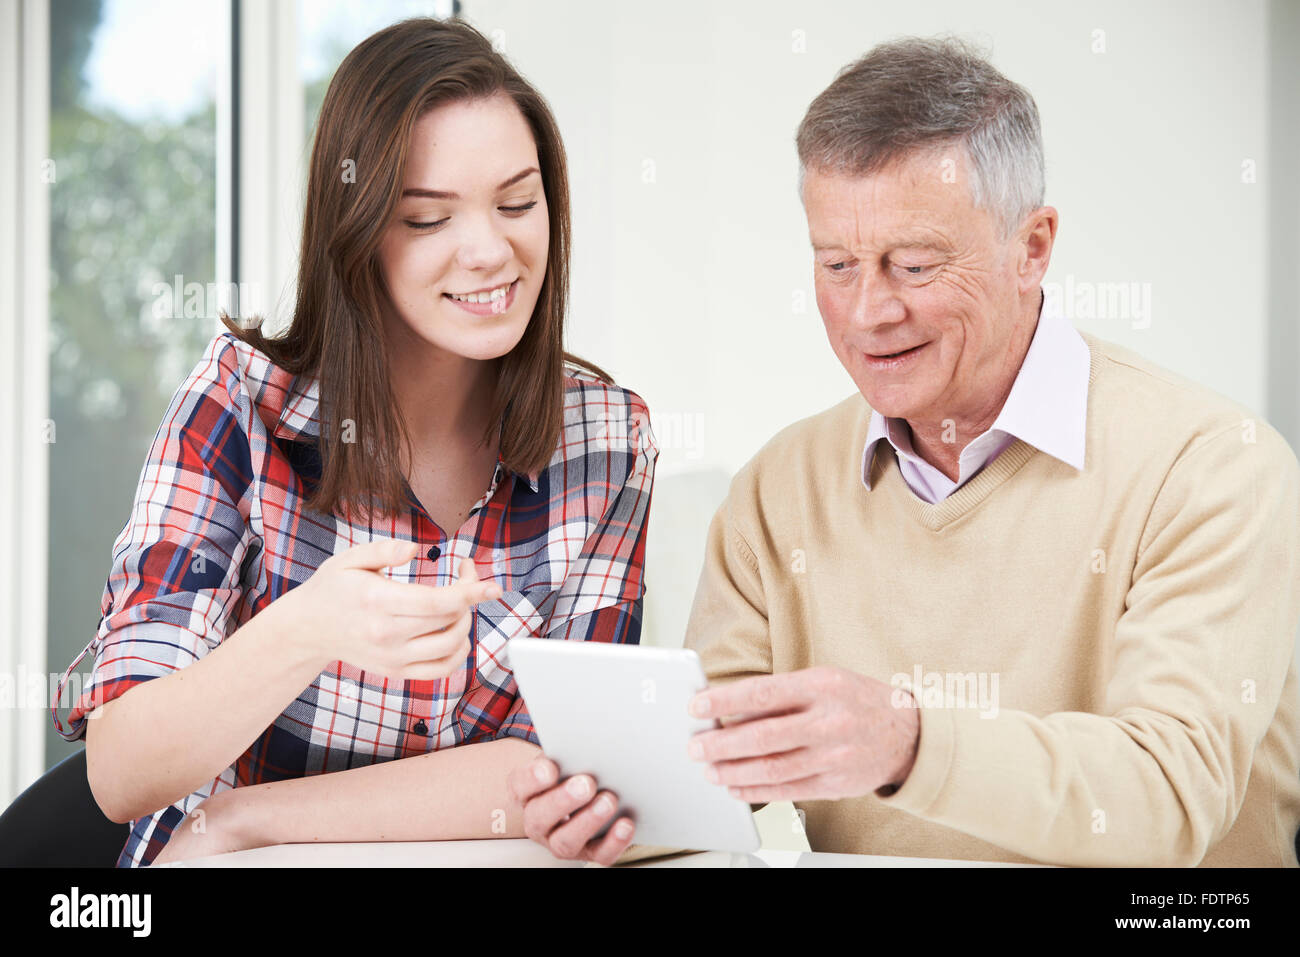 Teenage Granddaughter Showing Grandfather How To Use Digital Tablet Stock Photo